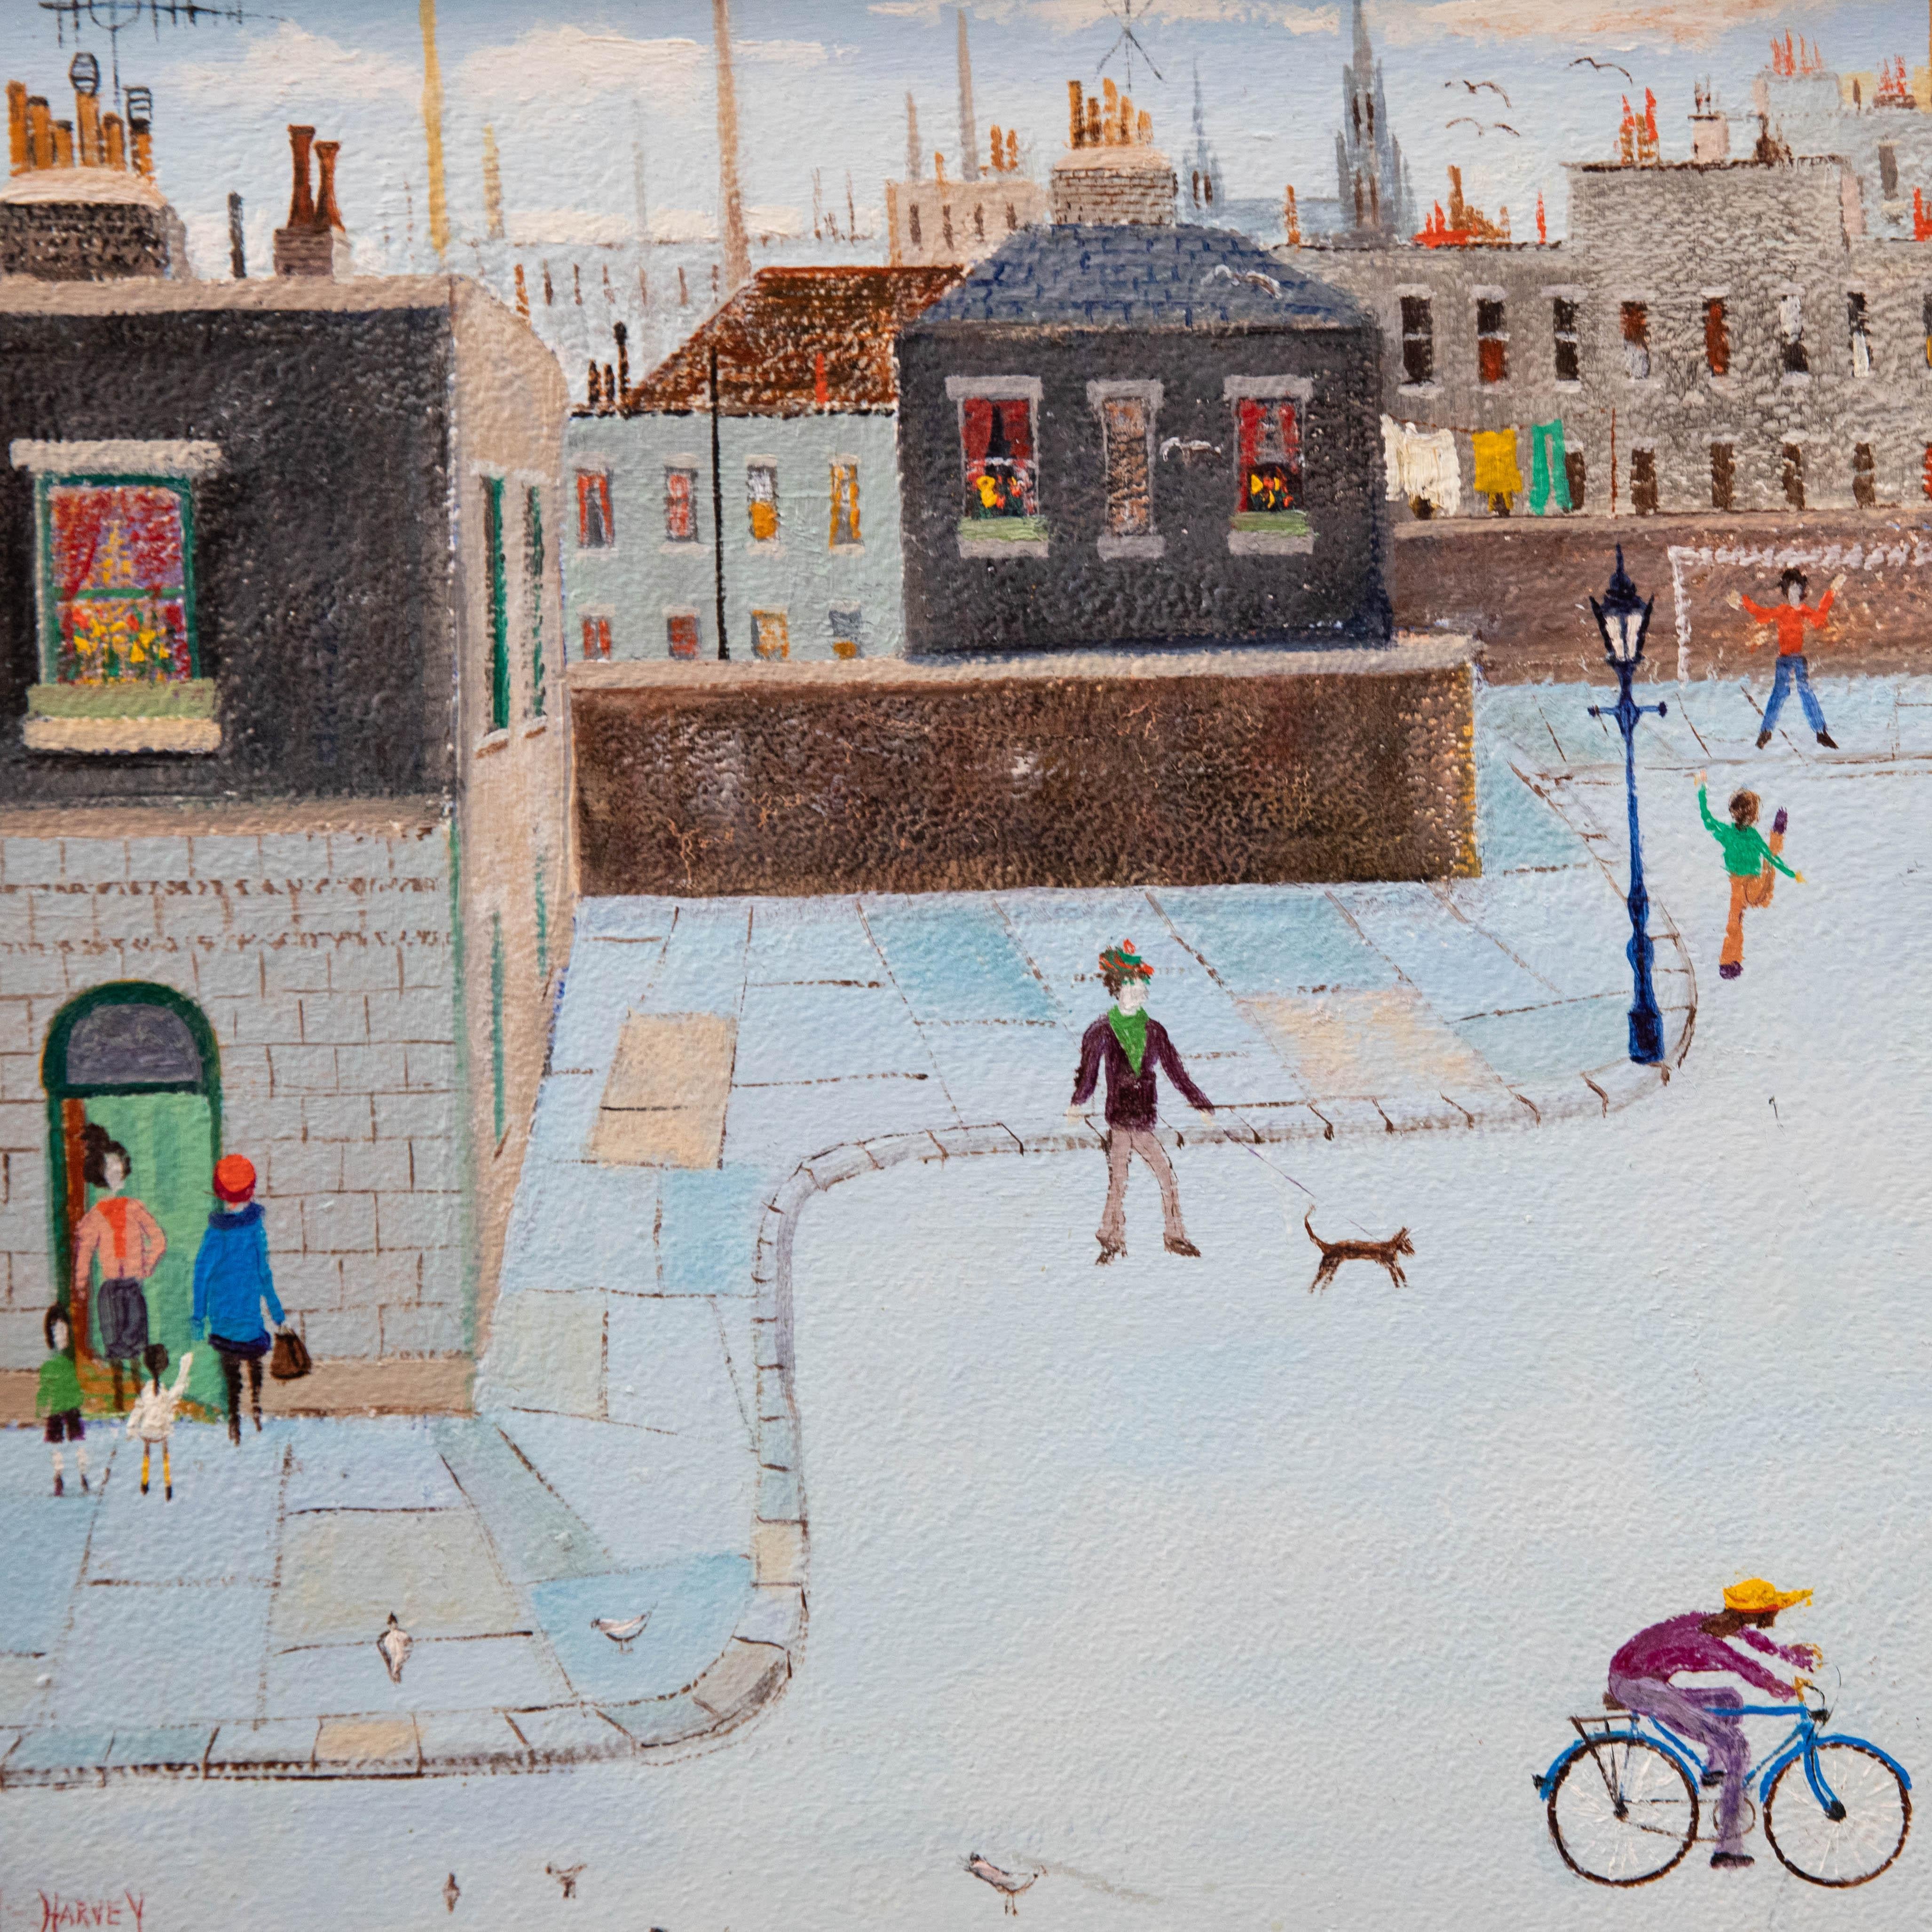 A charming oil in the style of L. S. Lowry showing figures participating in daily exercise. Whether it be cycling, dog walking, or kicking a ball in the street. This corner of London has it all going on. Well-presented in a complimenting blue